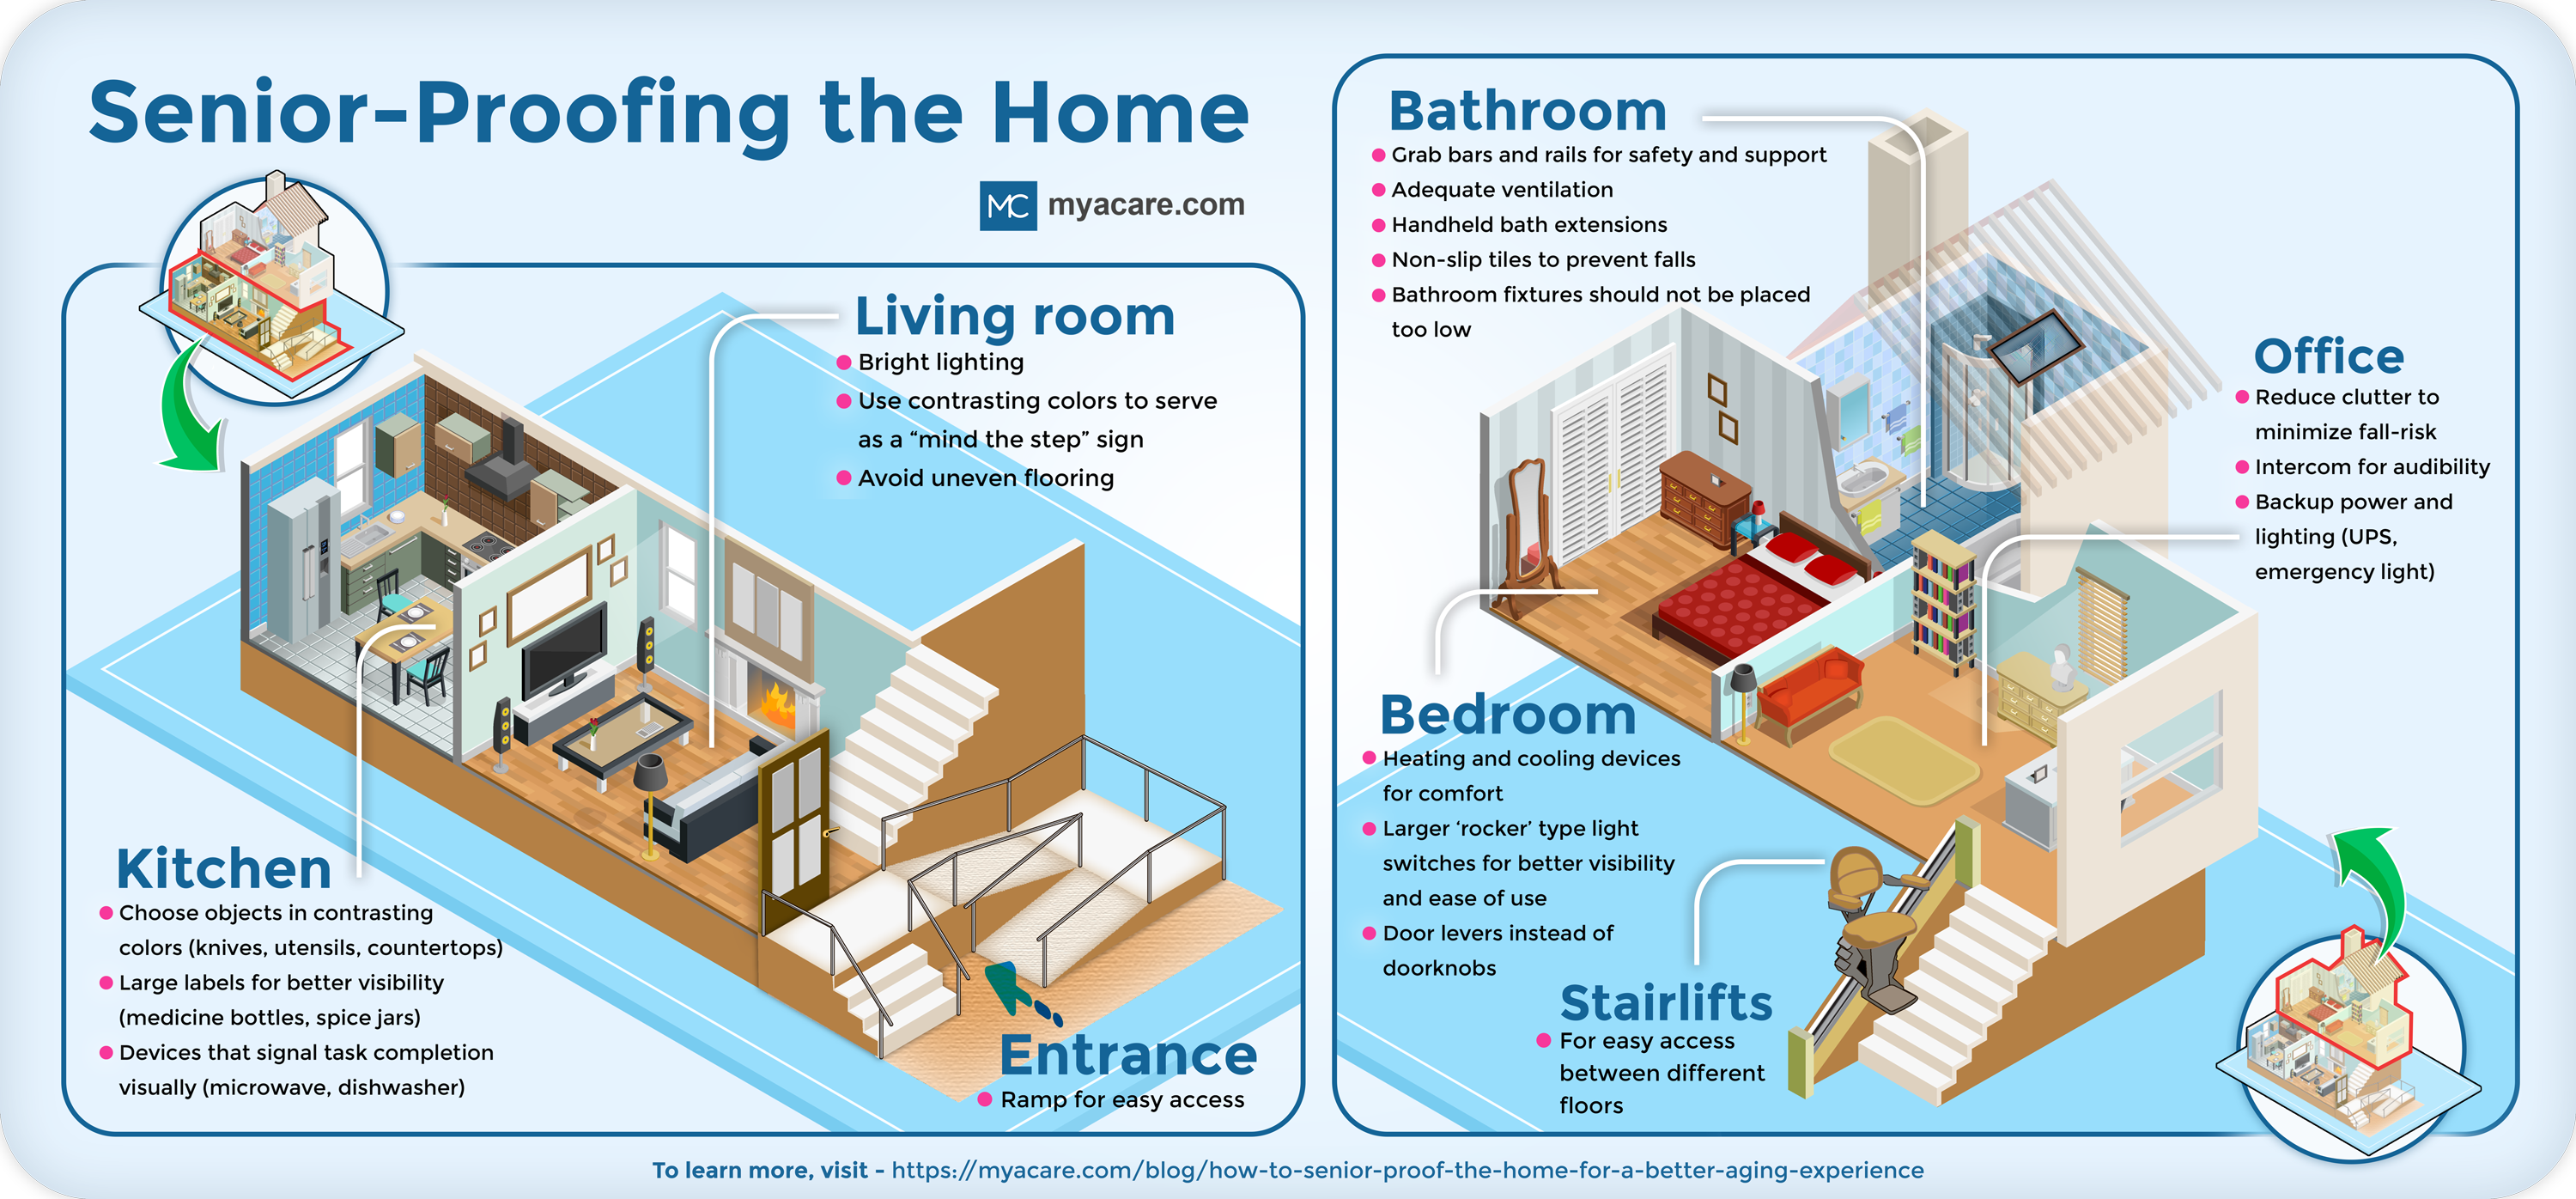 Senior proofing the home:Useful fittings,optimal placement of household objects & items,use ramps/railings,anti-slip flooring